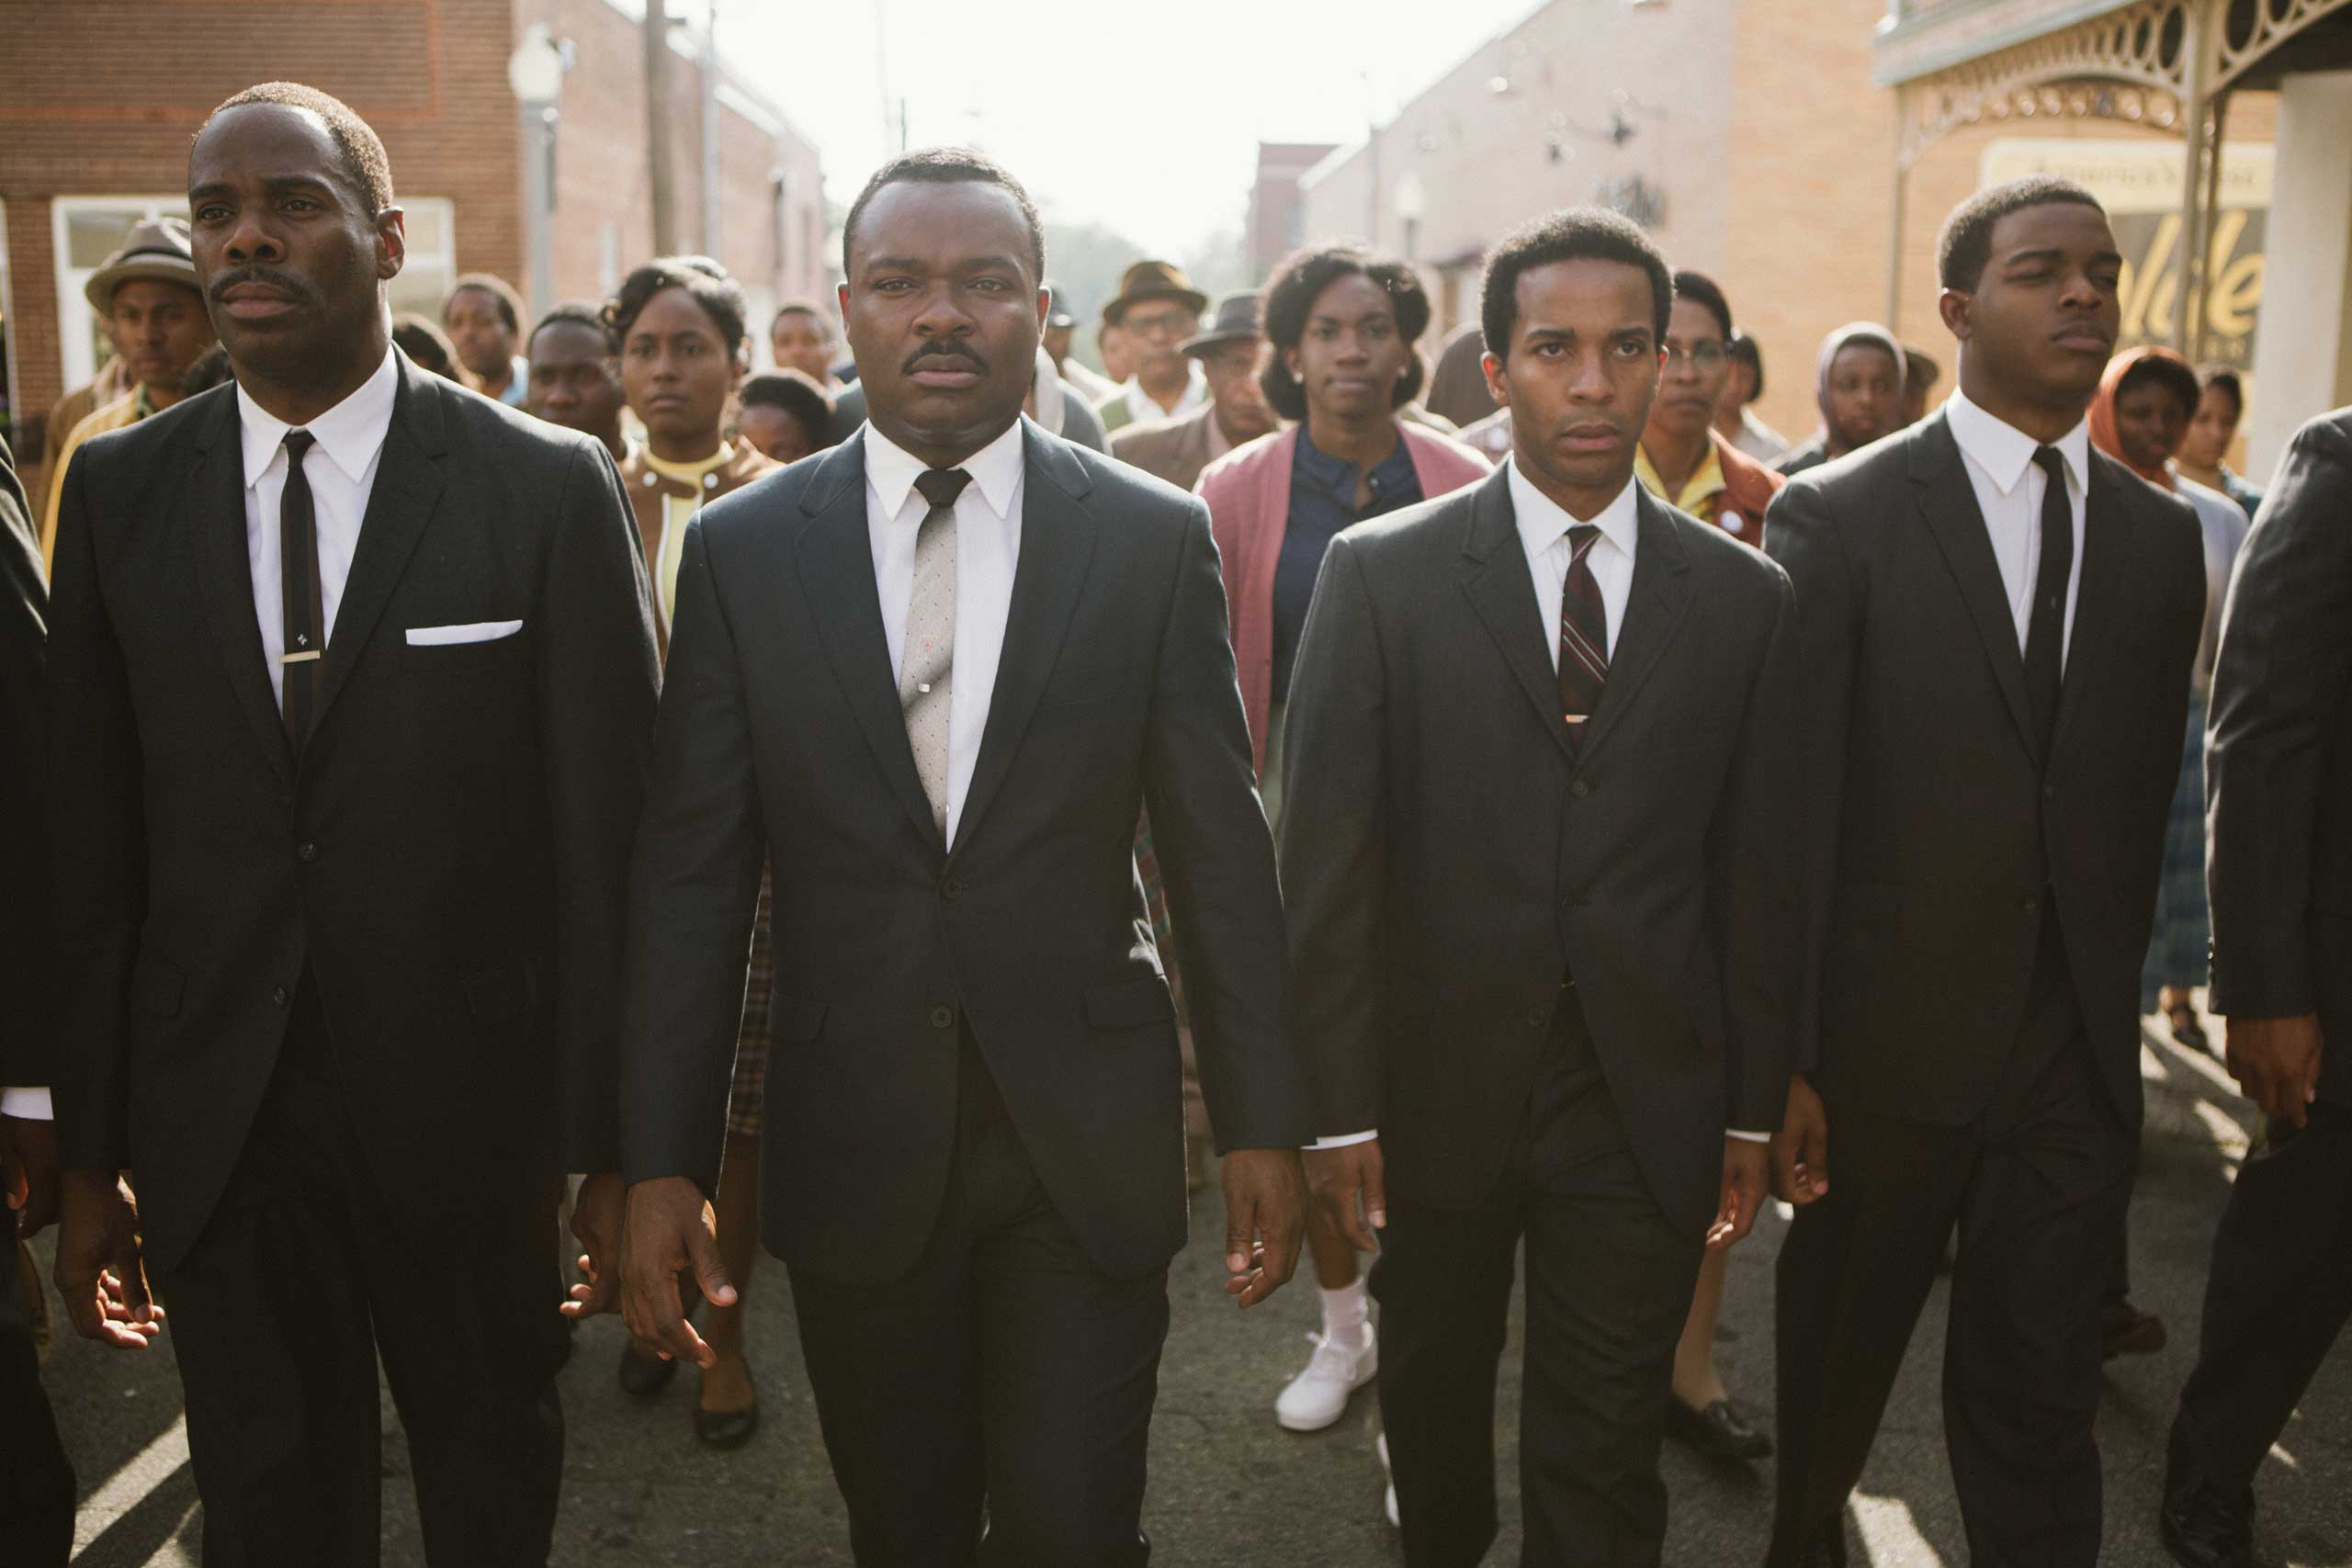 Left to right, foreground: Colman Domingo plays Ralph Abernathy, David Oyelowo plays Dr. Martin Luther King, Jr., André Holland plays Andrew Young, and Stephan James plays John Lewis in <i>Selma</i>. (Atsushi Nishijima—Paramount Pictures)